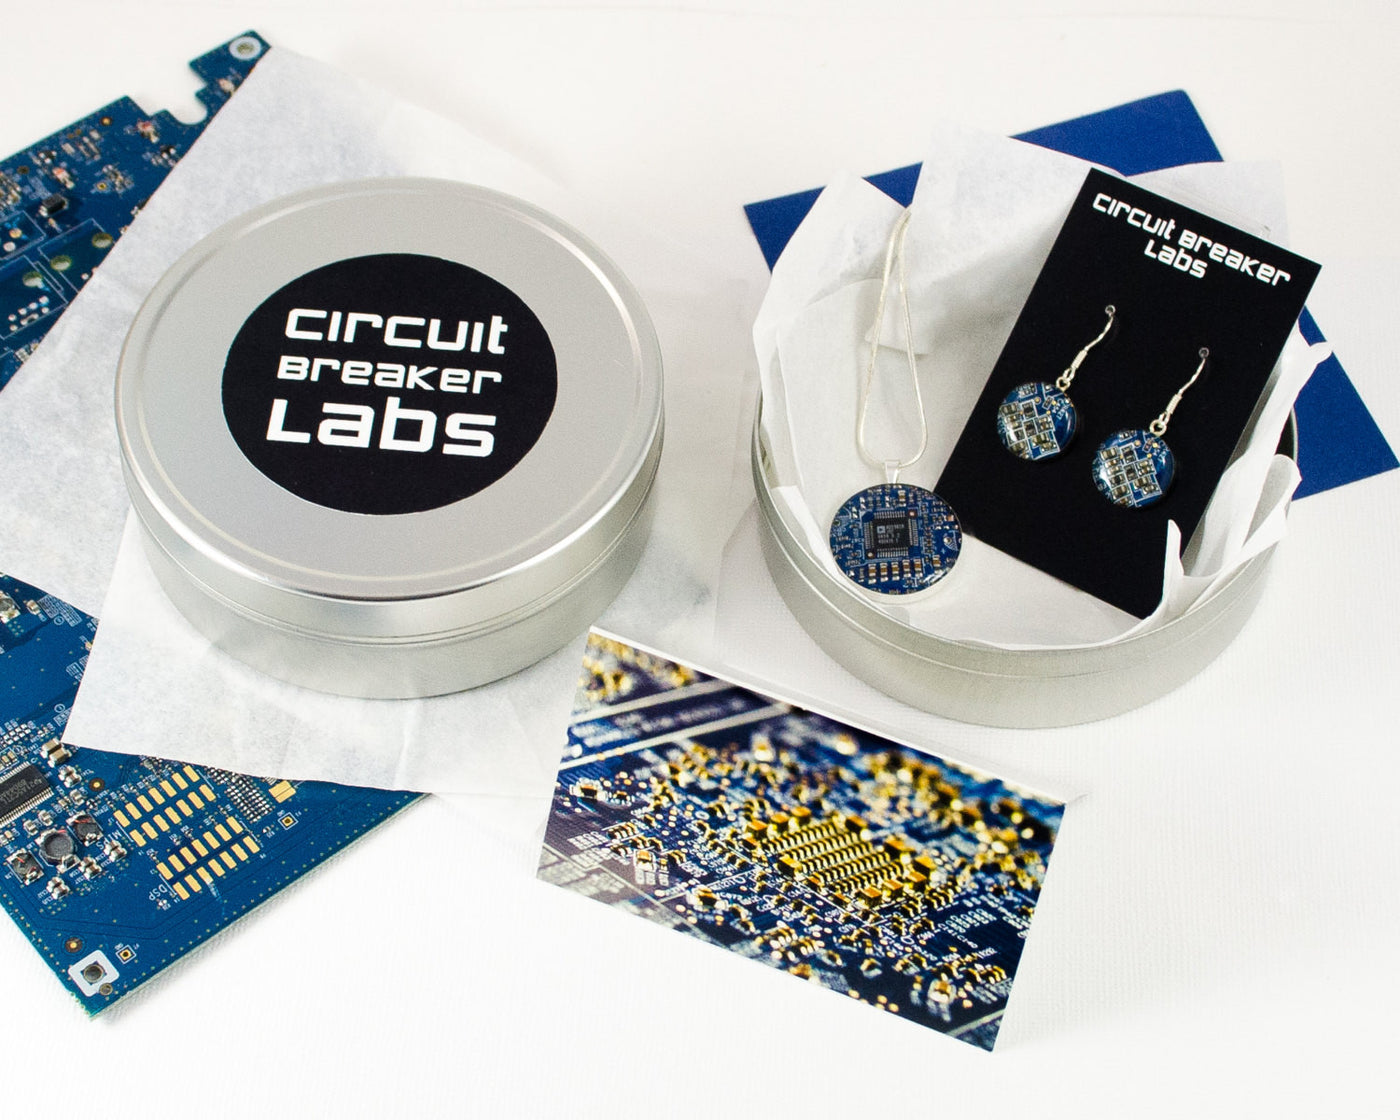 Circuit Board Necklace Gift Set - Set of 6 Necklaces